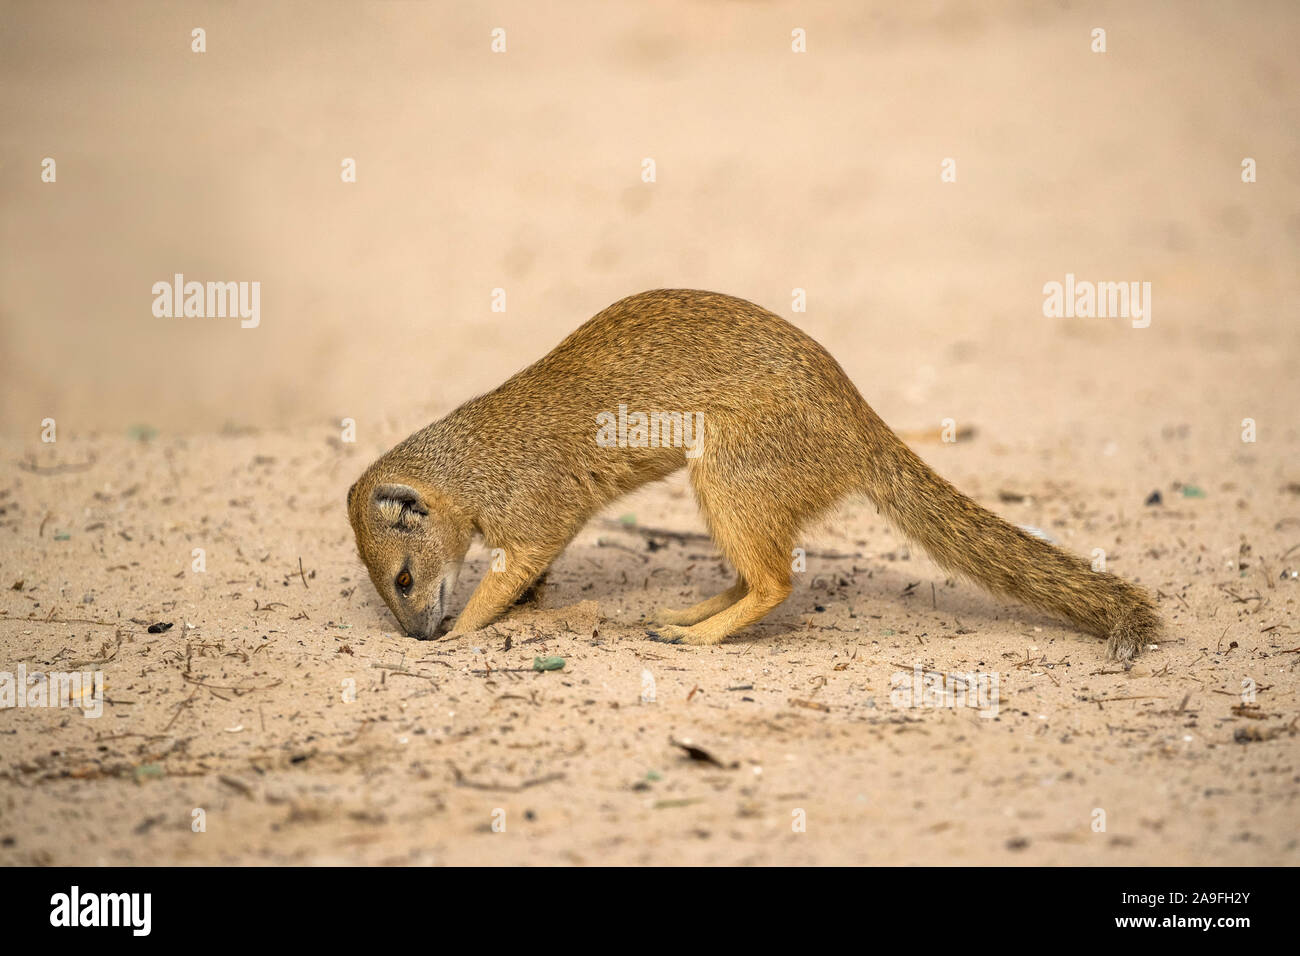 Yellow mongoose (Cynictis penicillata) foraging, Kgalagadi Transfrontier National Park, Northern Cape, South Africa Stock Photo